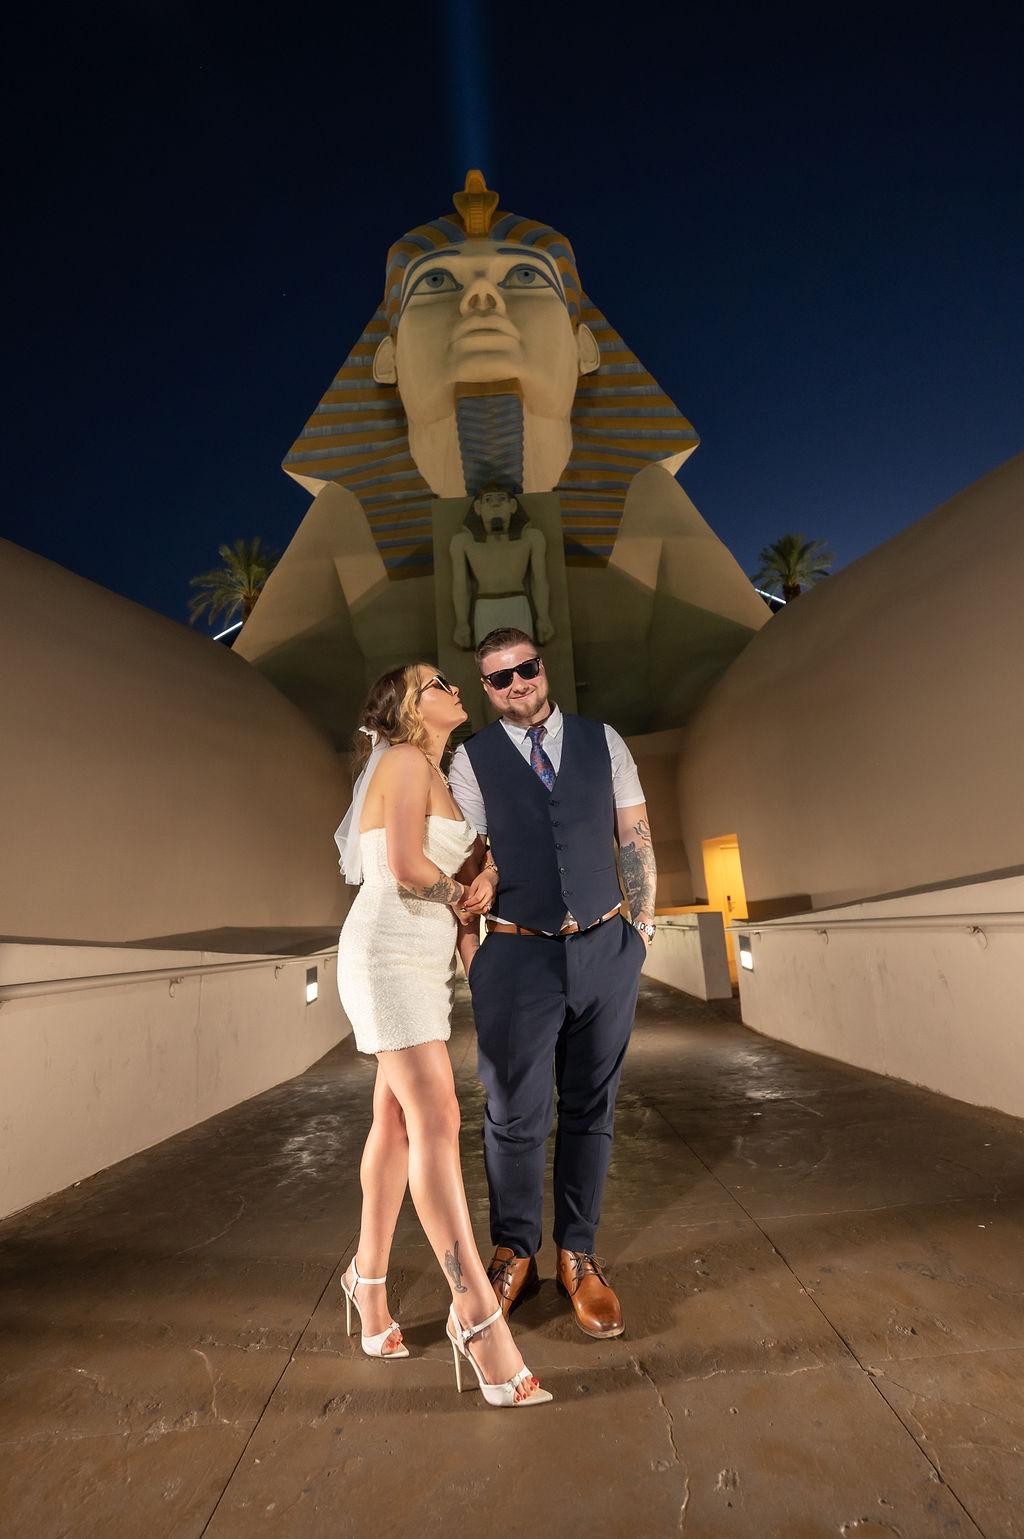 Photographers of Las Vegas Photographers Of Las Vegas Photographers of Las Vegas focus of every shoot is capturing your vision. We work together to bring your memories to life. 7